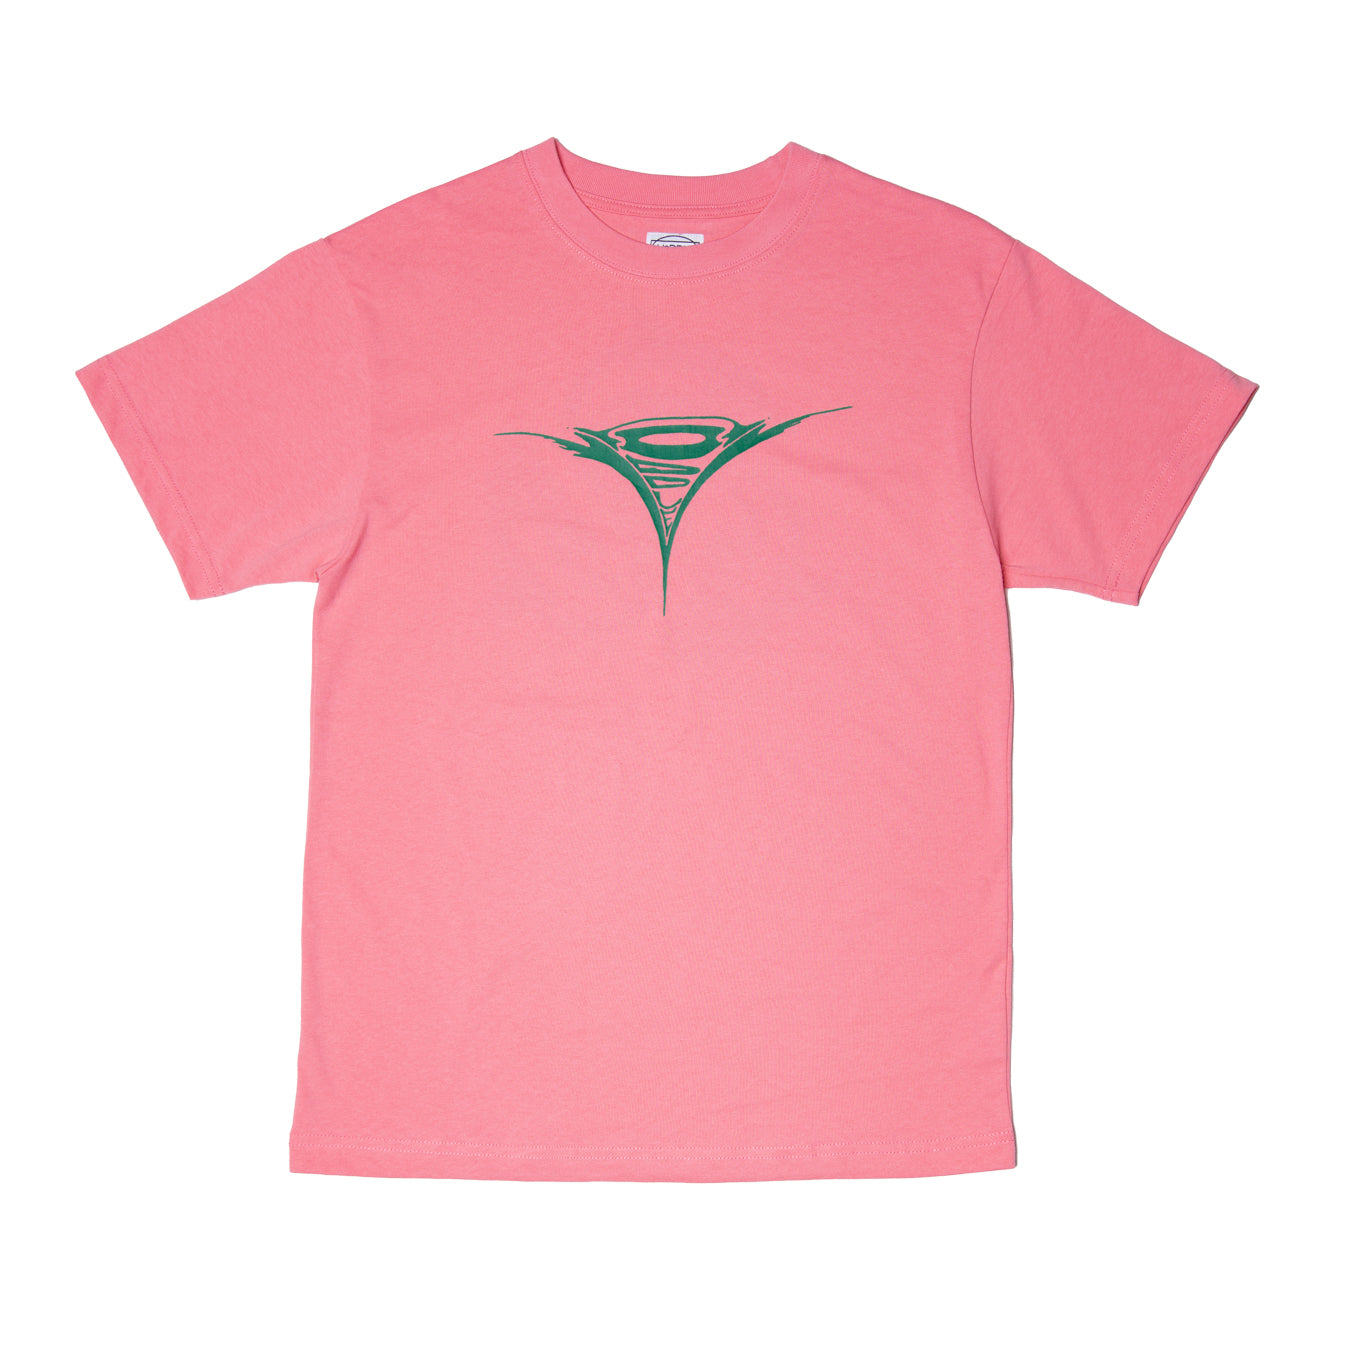 Turbo Dolphin Logo Tee, Washed Pink / Green